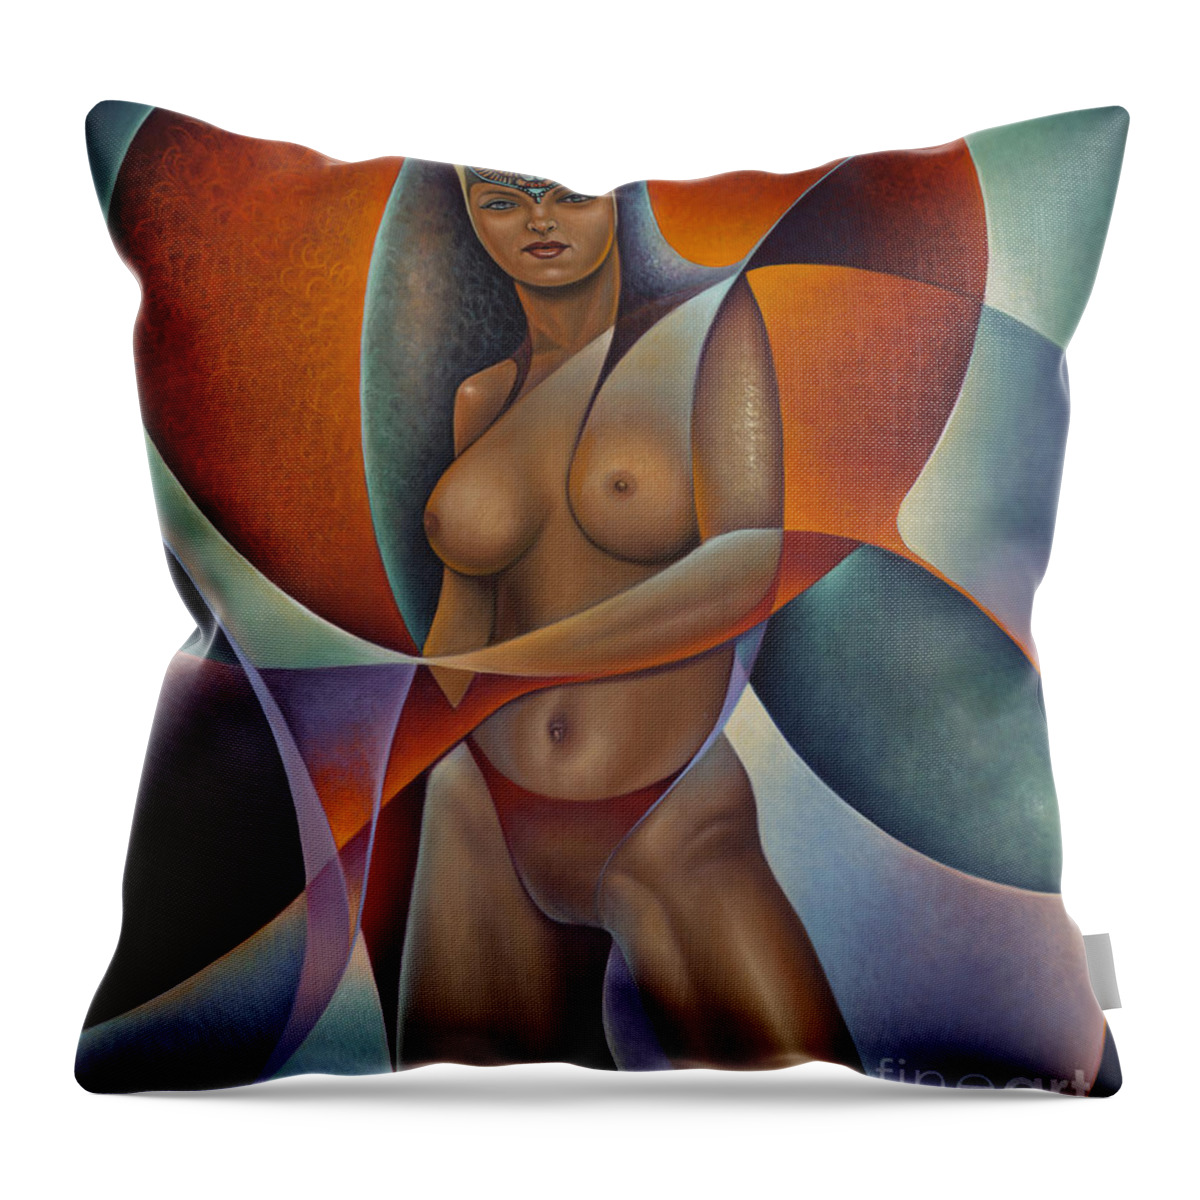 Queen Throw Pillow featuring the painting Dynamic Queen I by Ricardo Chavez-Mendez